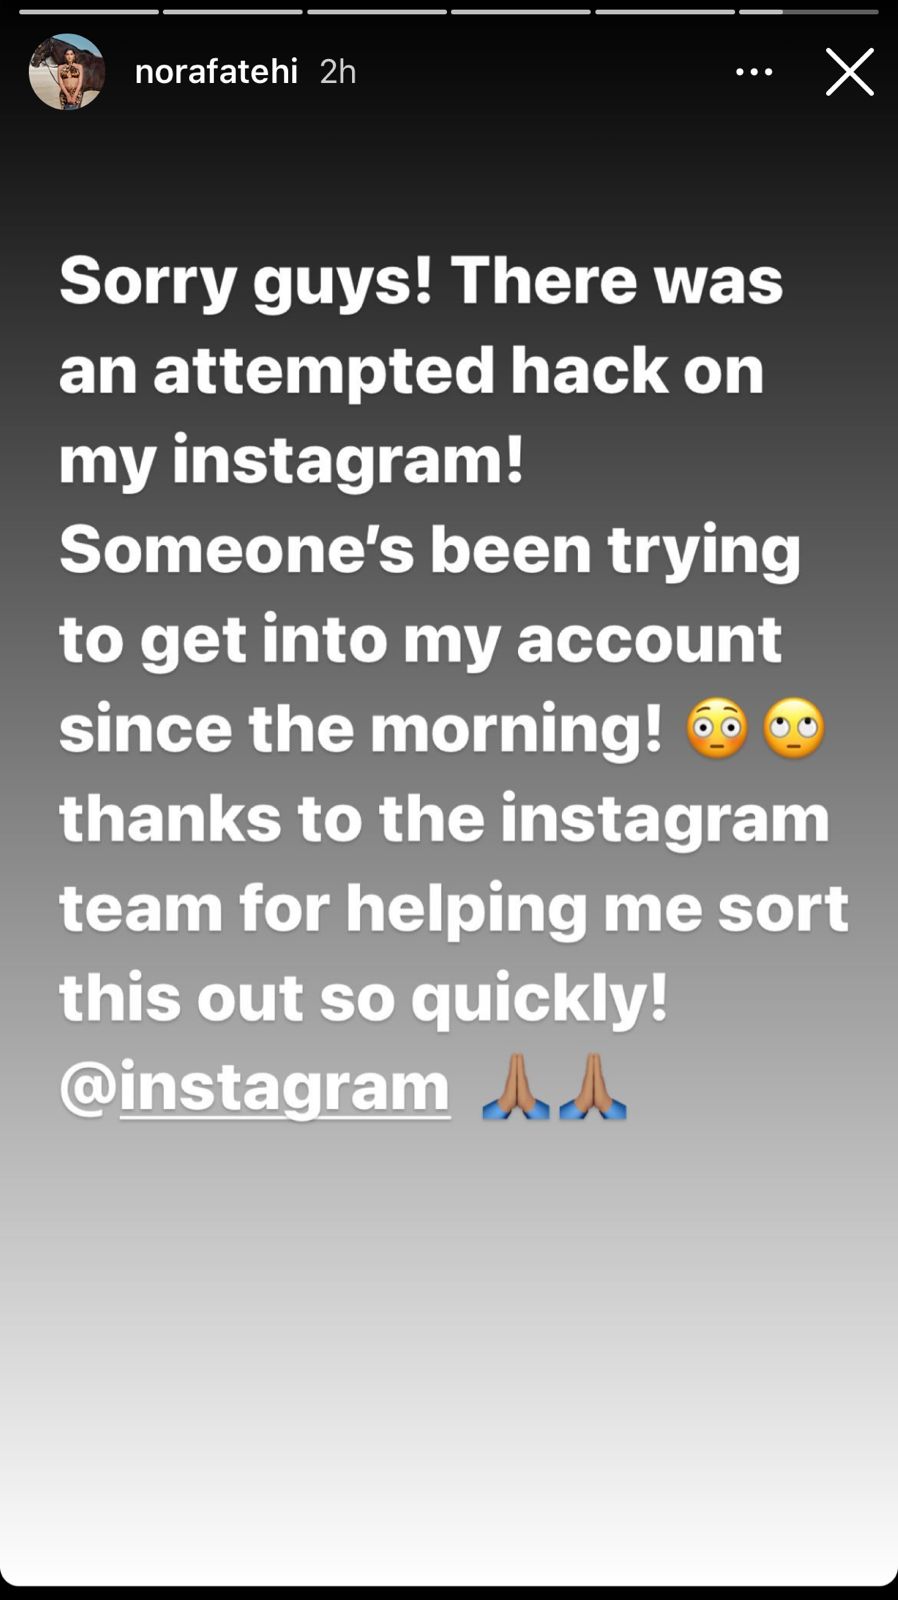 Nora Fatehi Deletes Her Instagram Account, Restores Later Claiming Attempted Hack